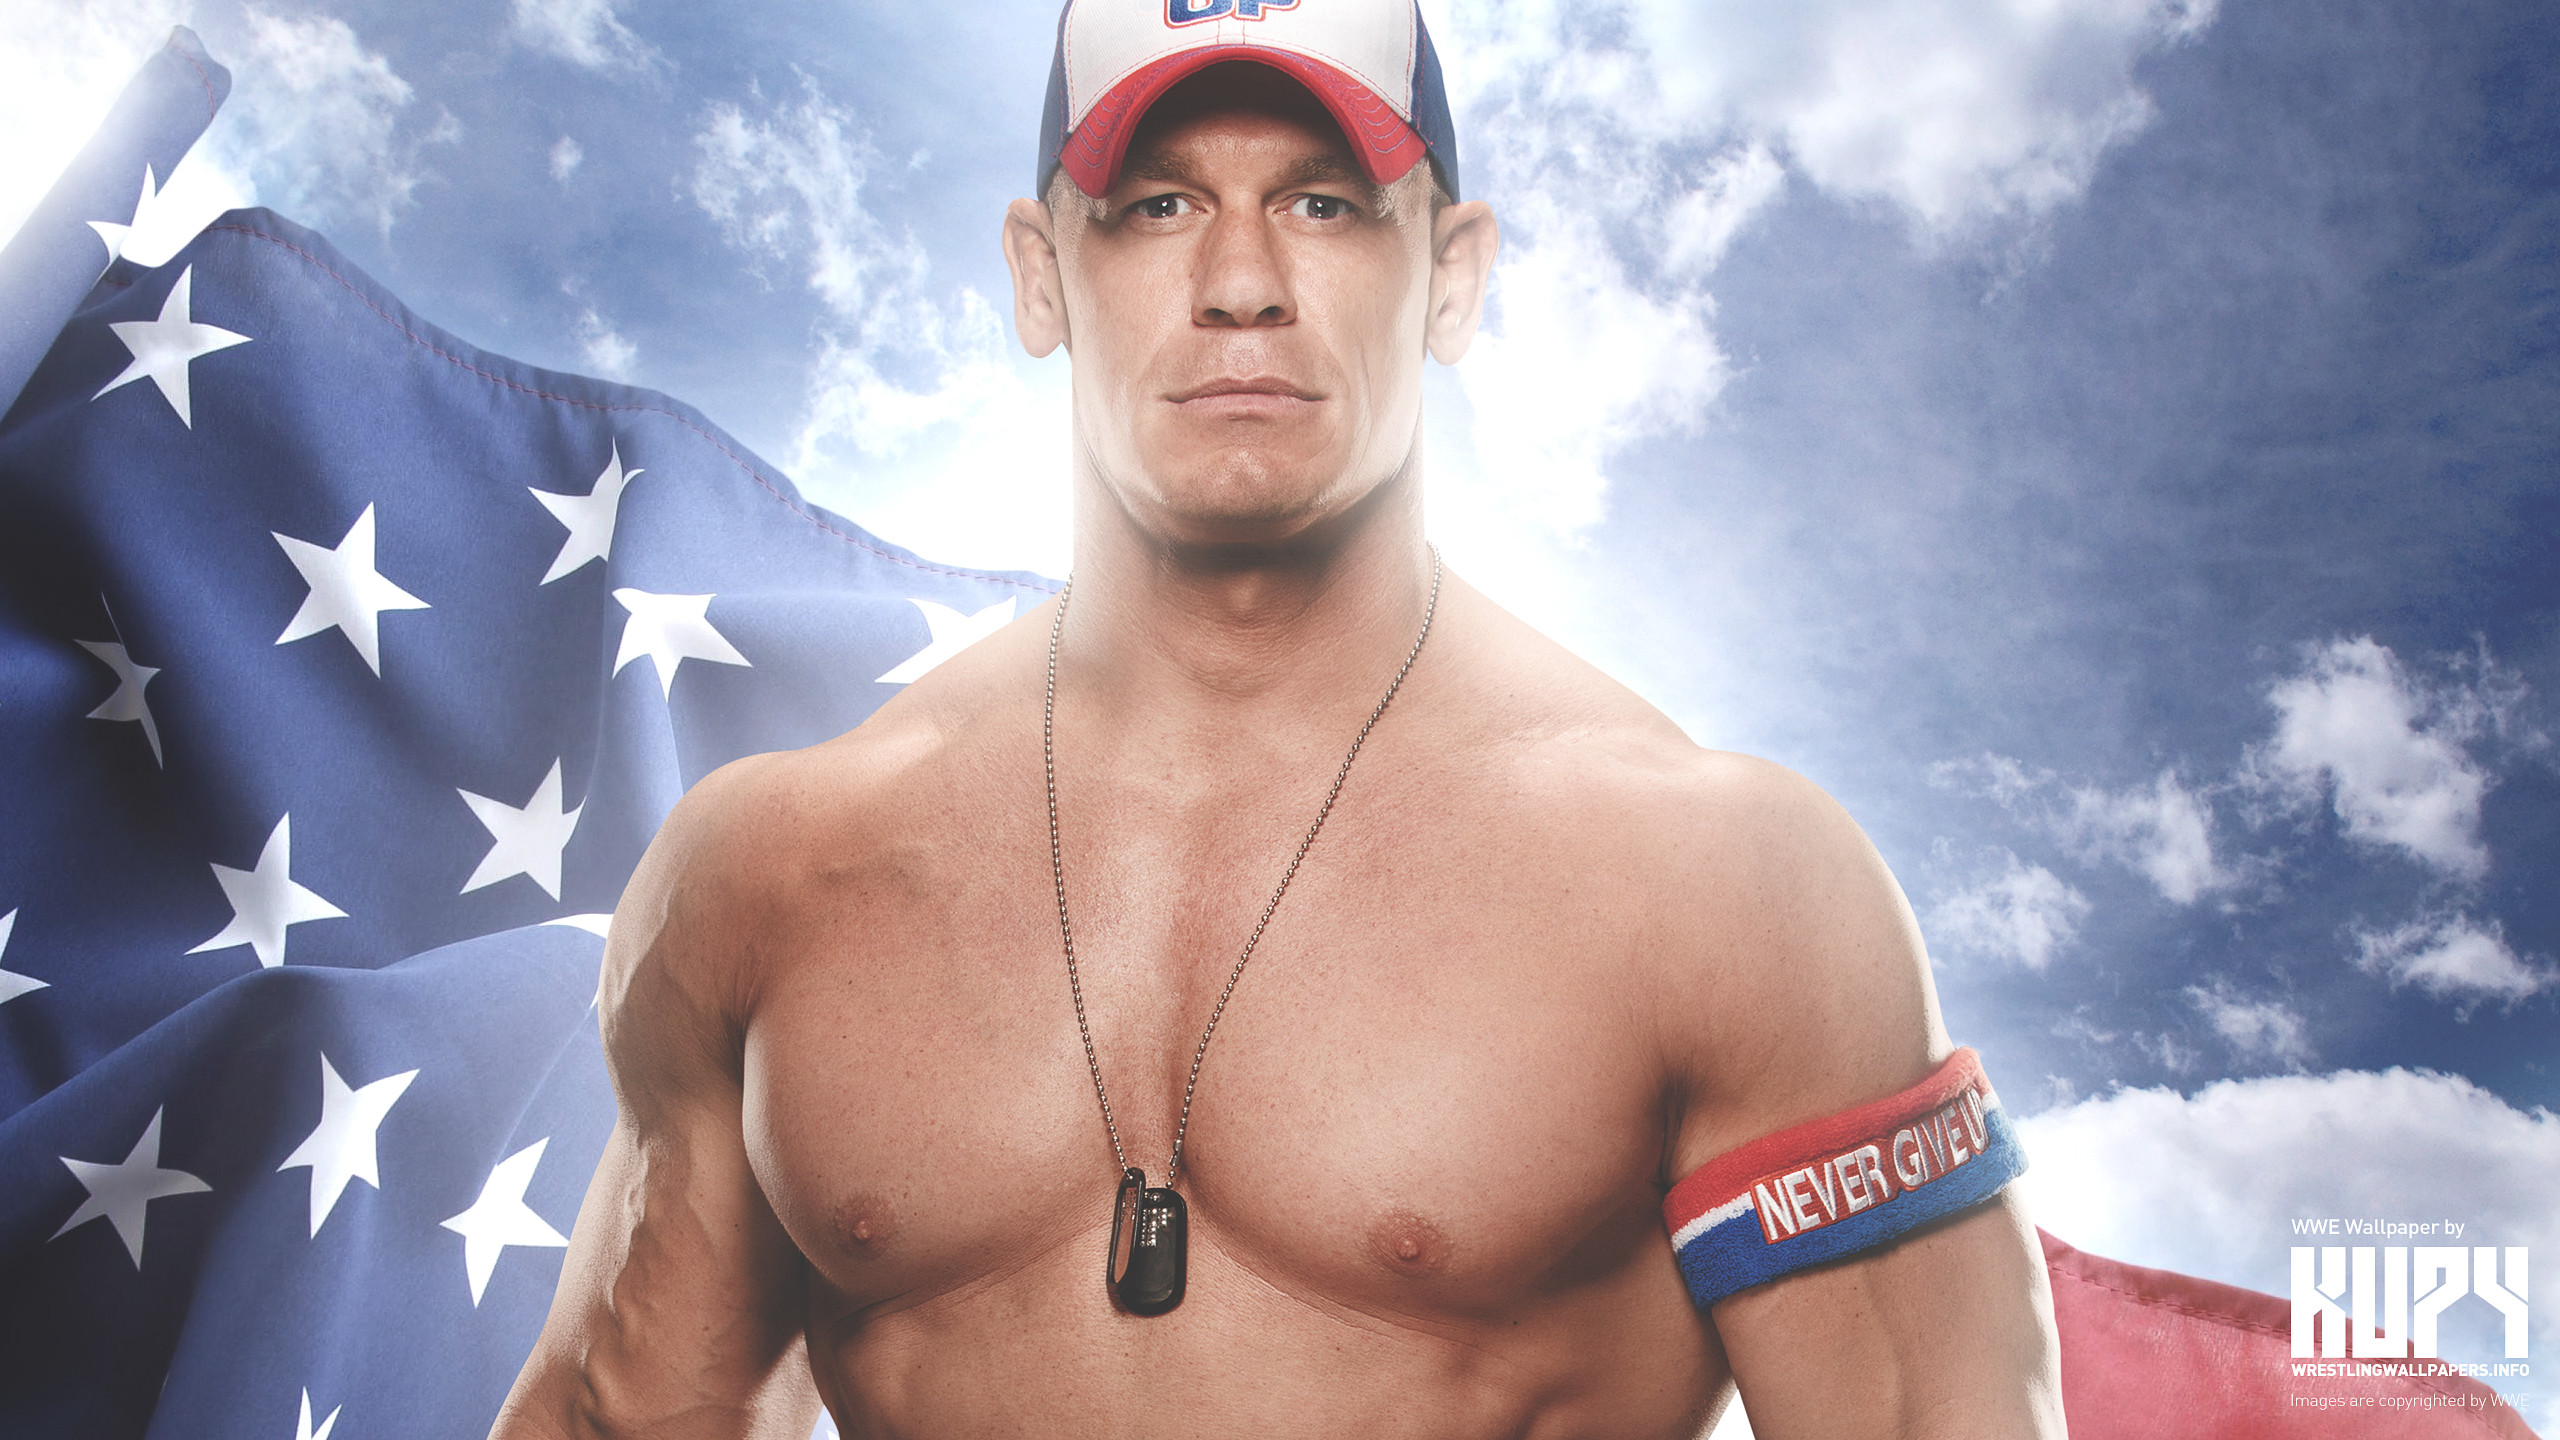 2560x1440 2016 John Cena Wallpapers - HD Wallpapers Backgrounds of Your Choice